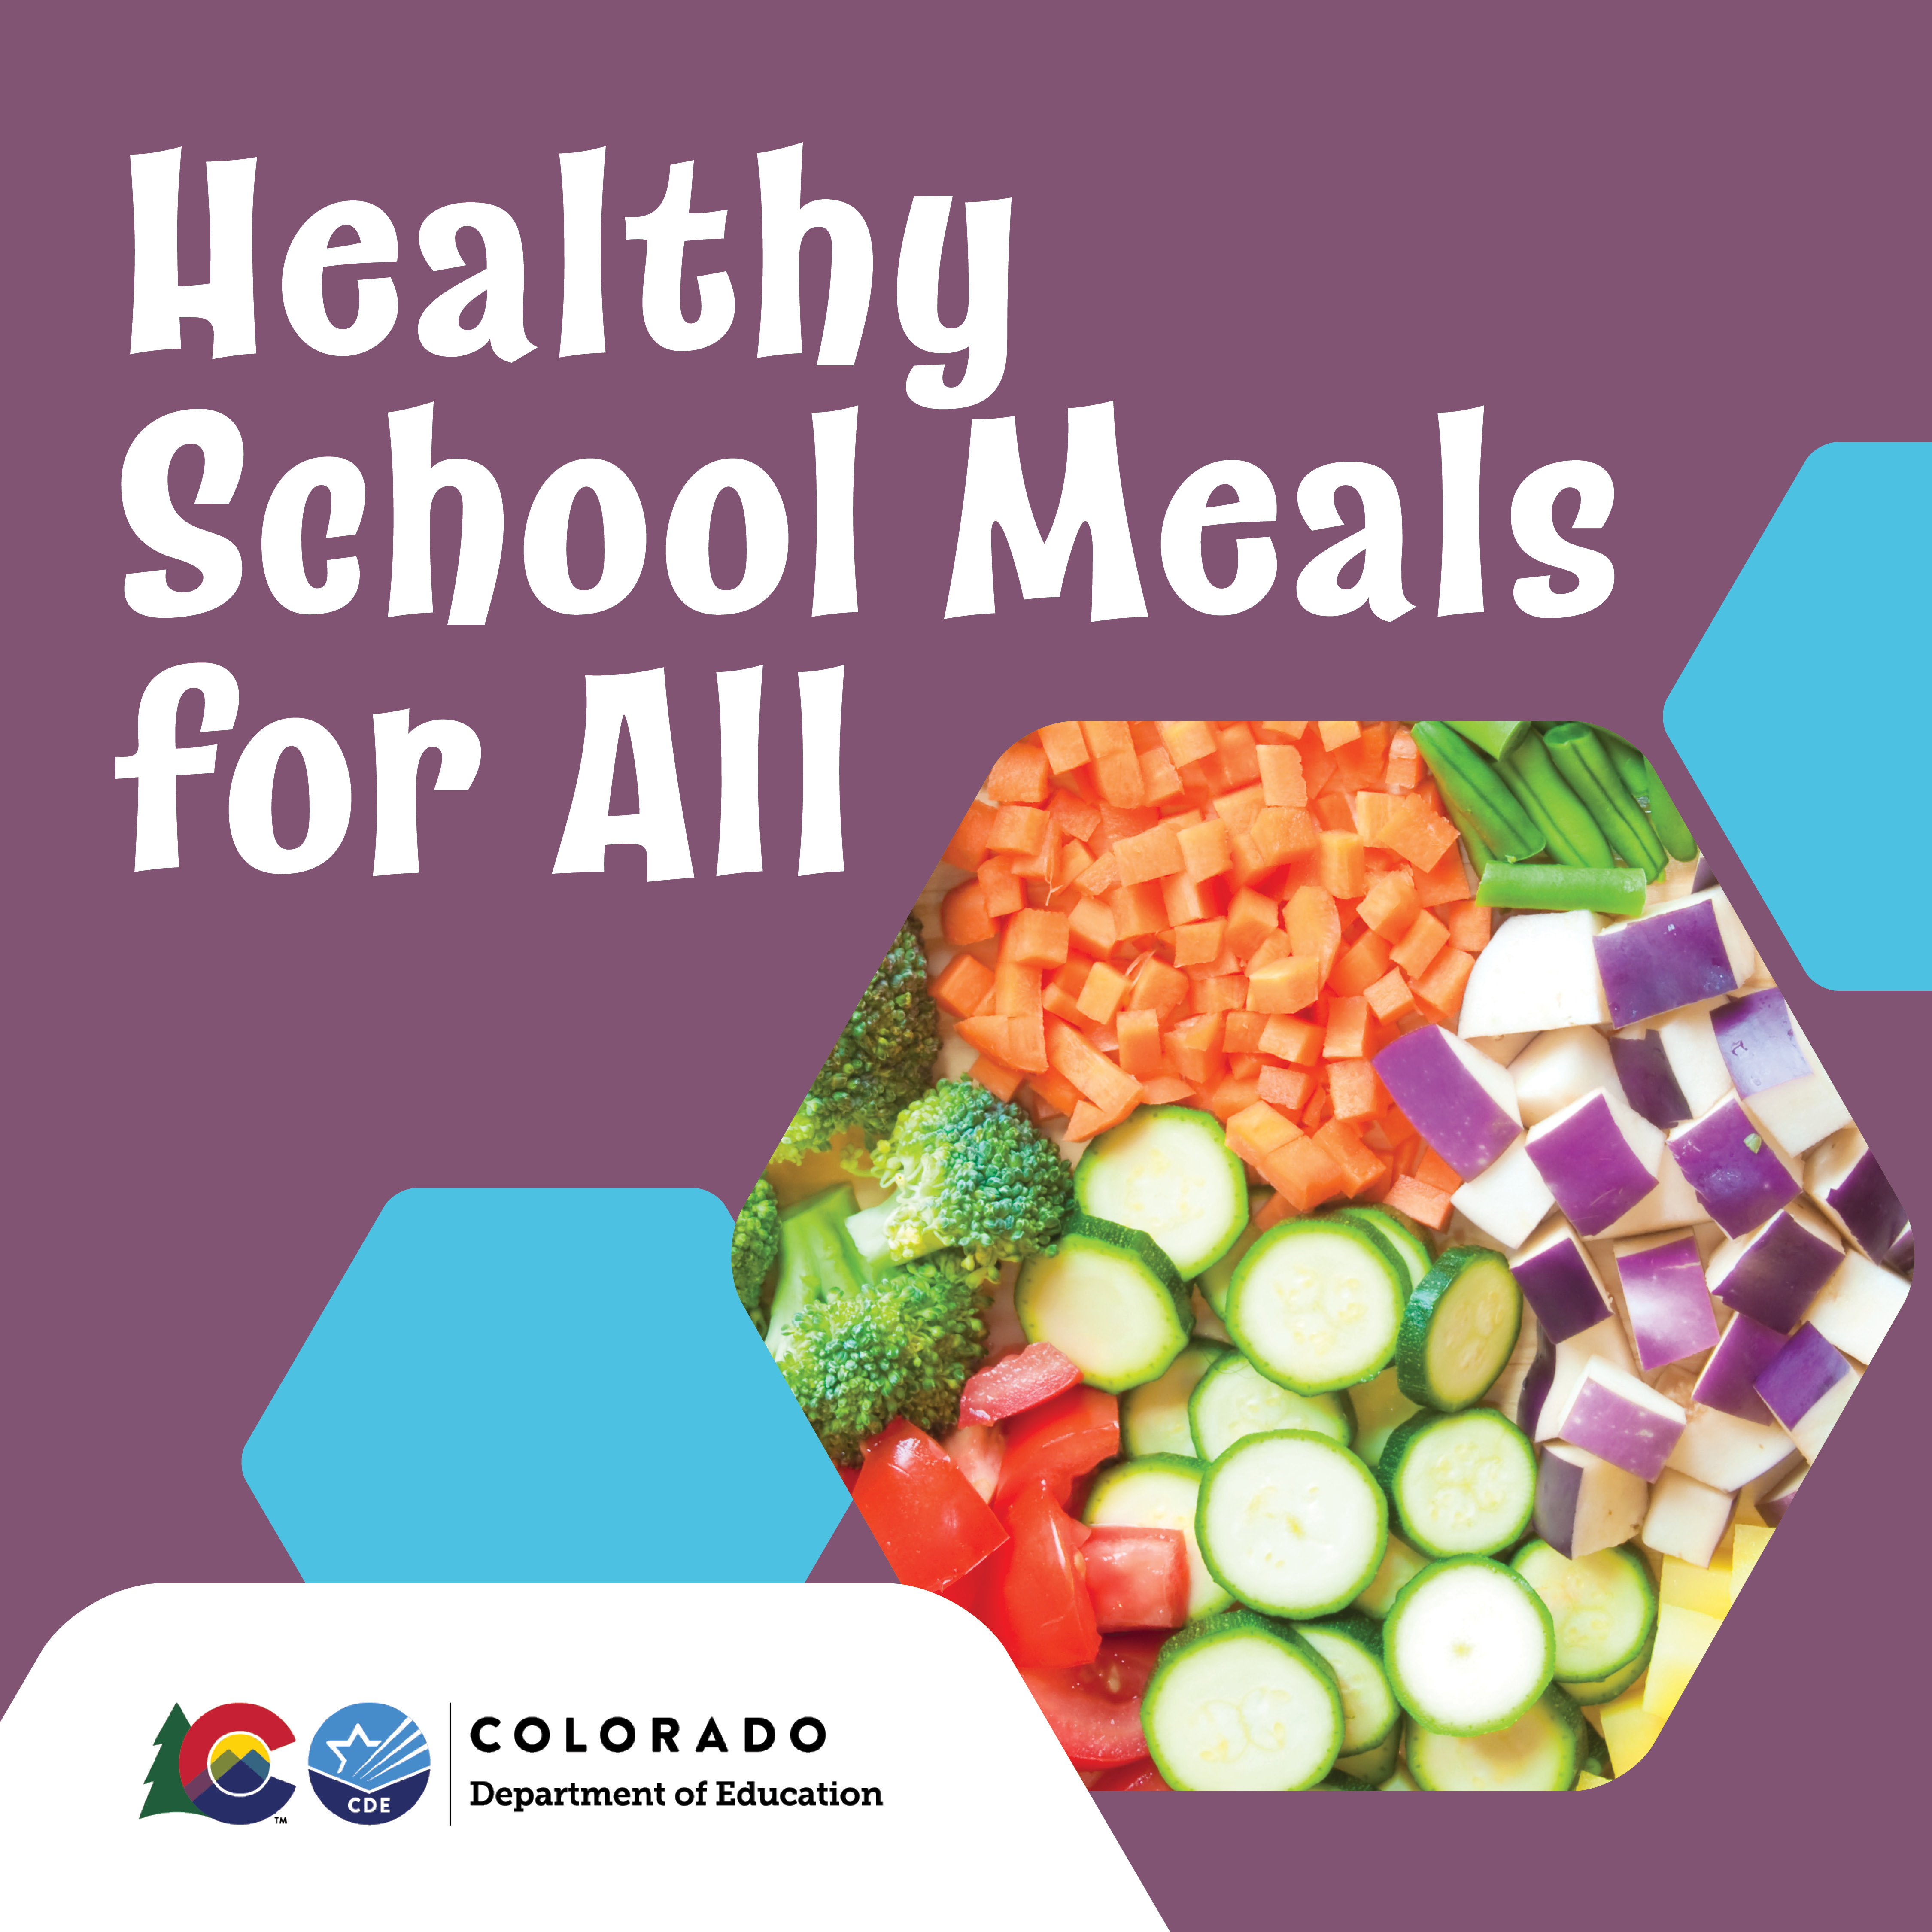  Healthy School Meals Colorado Department of Education social media image with text and veggies